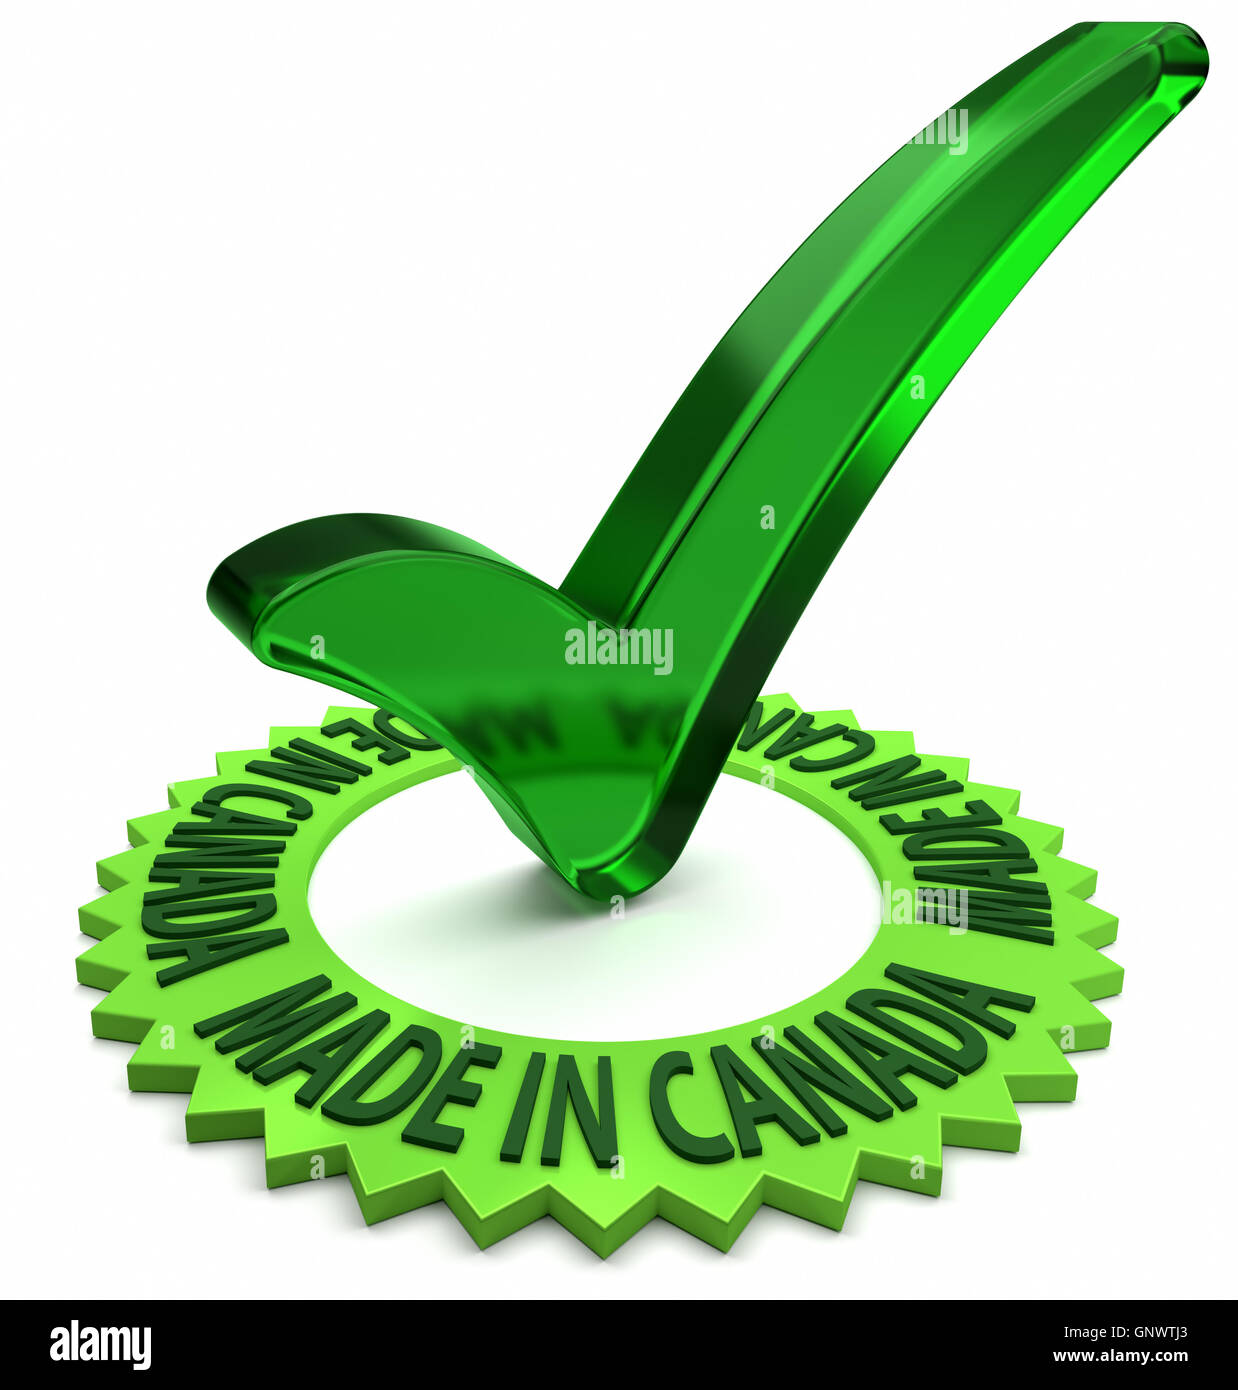 Made in Canada Stock Photo